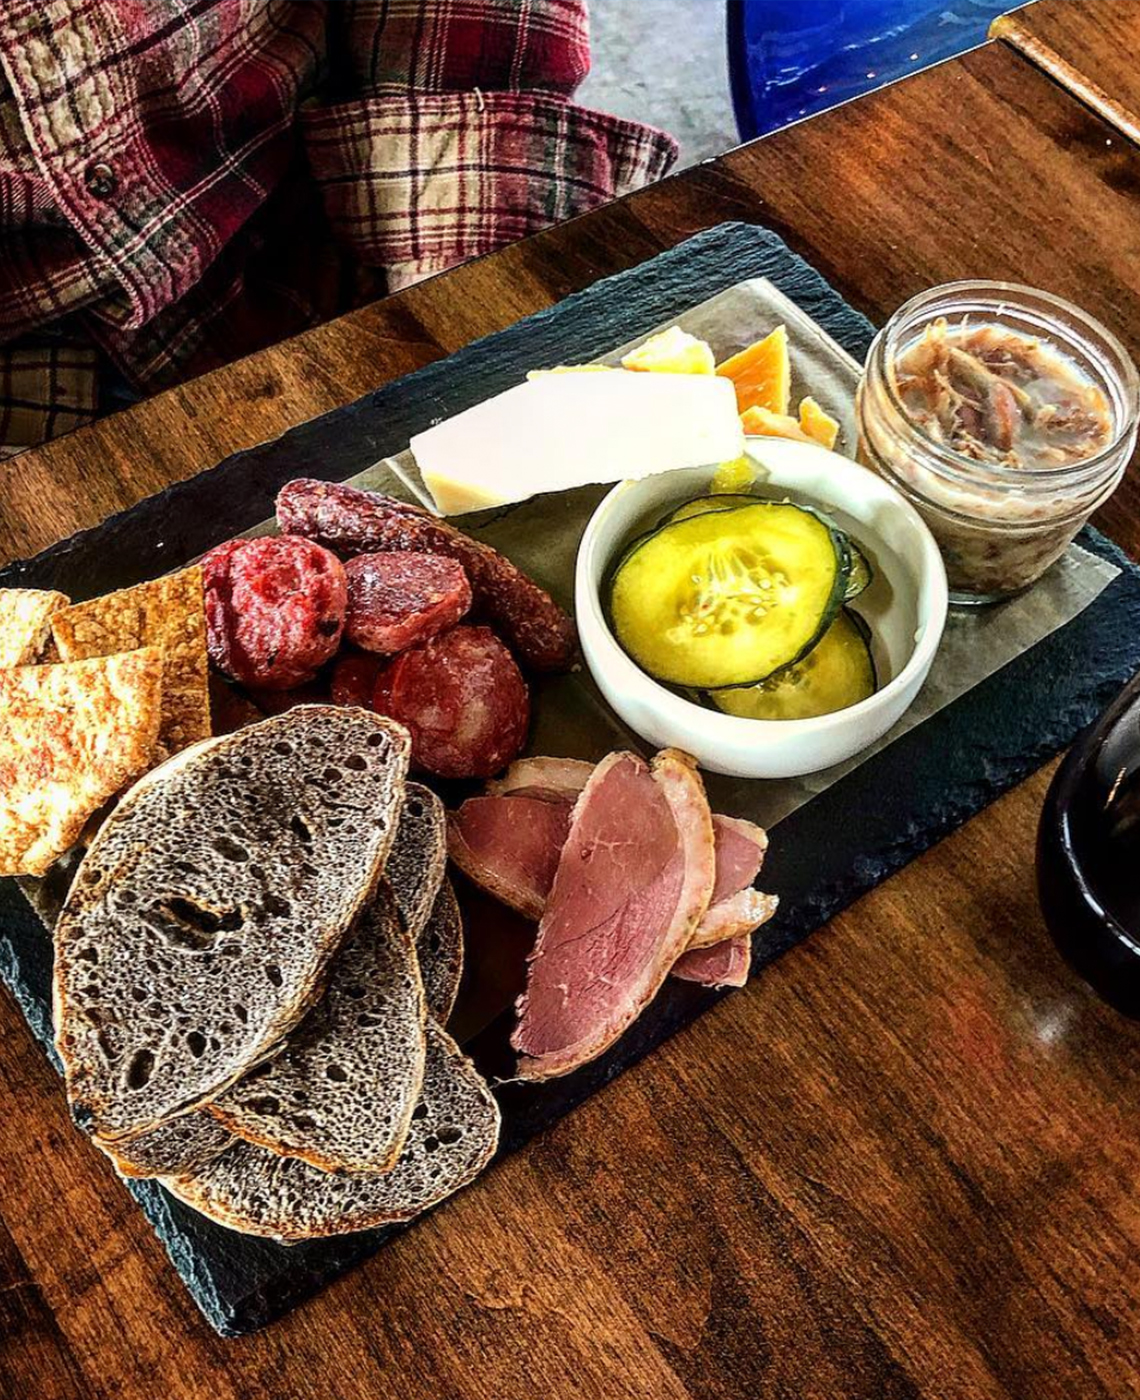 Ploughman's Plate in The Tasting Barn